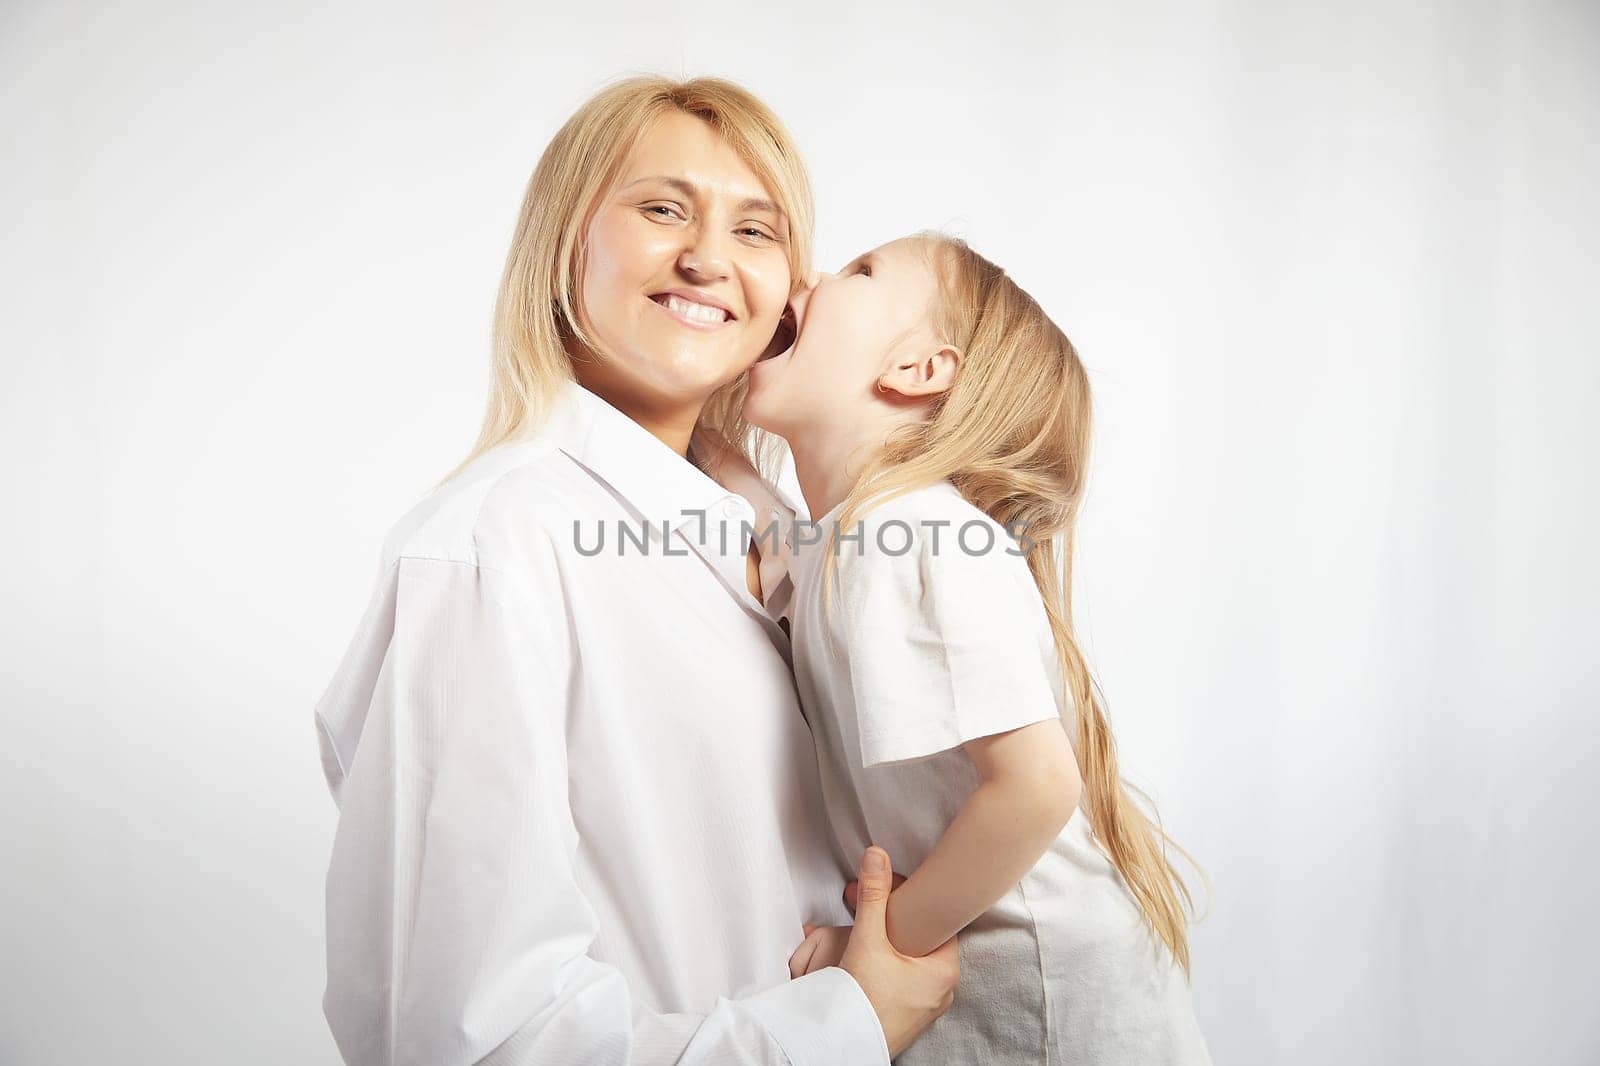 Portrait of blonde mother and daughter who having communicate and play on a white background. Mom and little girl models pose in the studio. The concept of love, friendship, caring in the family